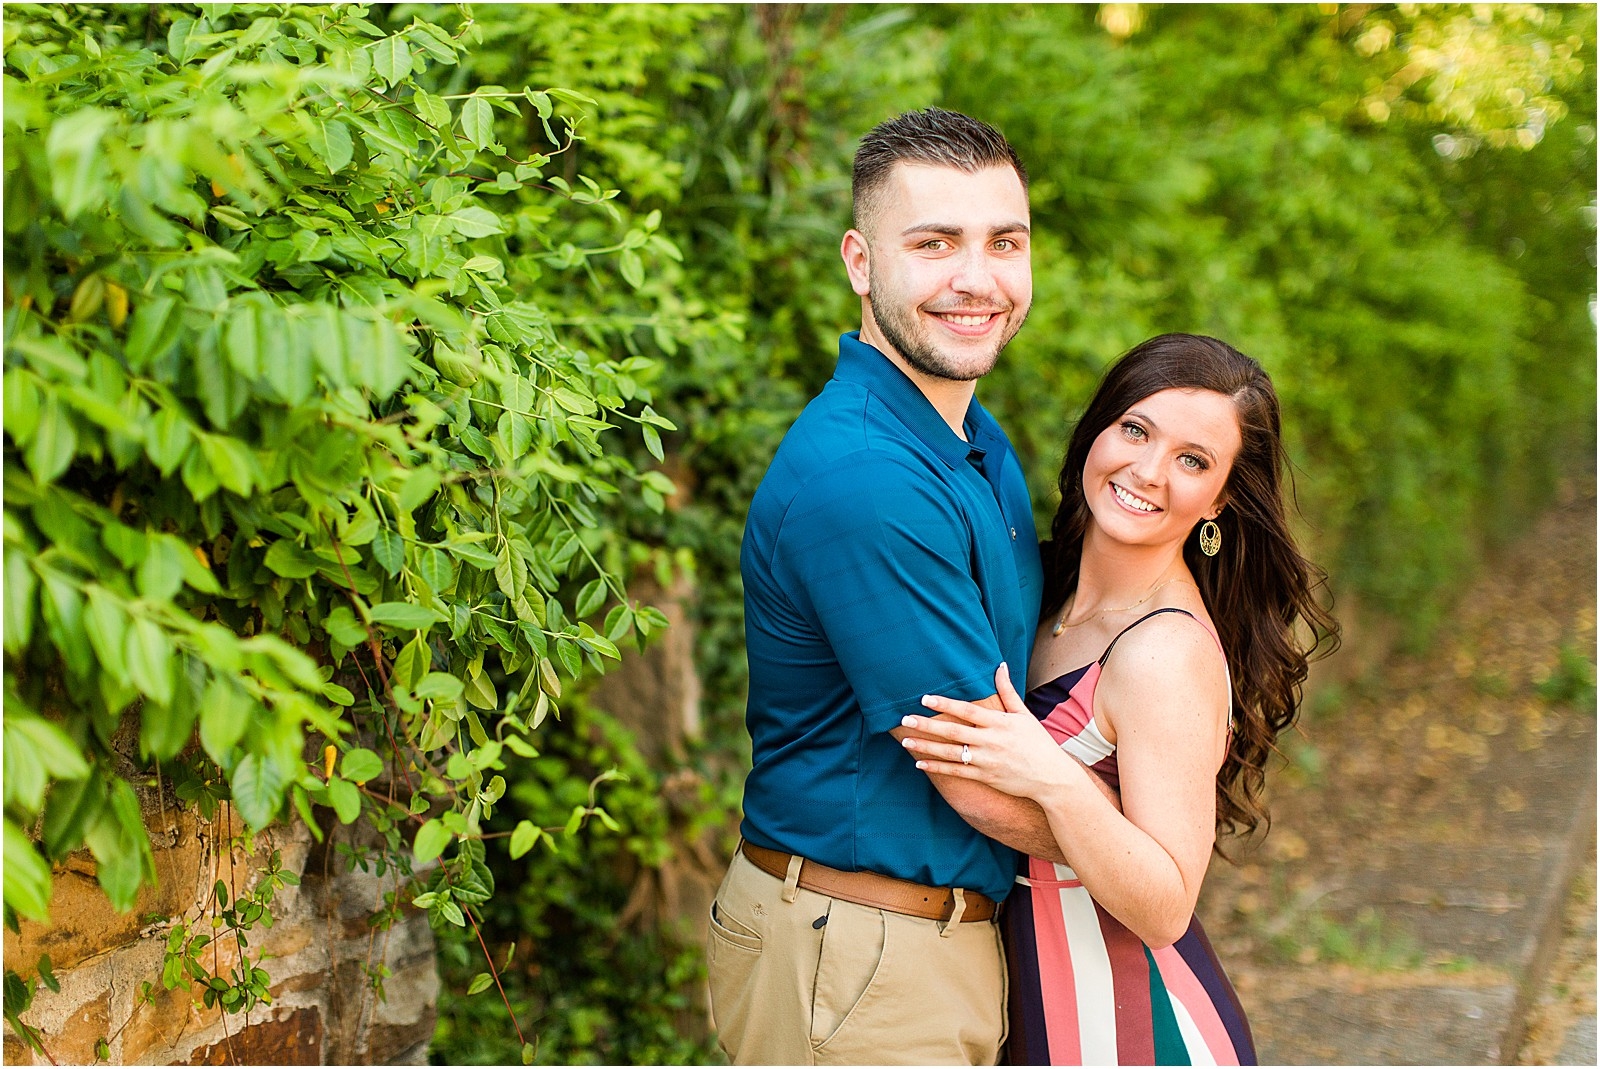 Downtown Newburgh Engagement Session | Matt and Blaire | Bret and Brandie Photography001.jpg